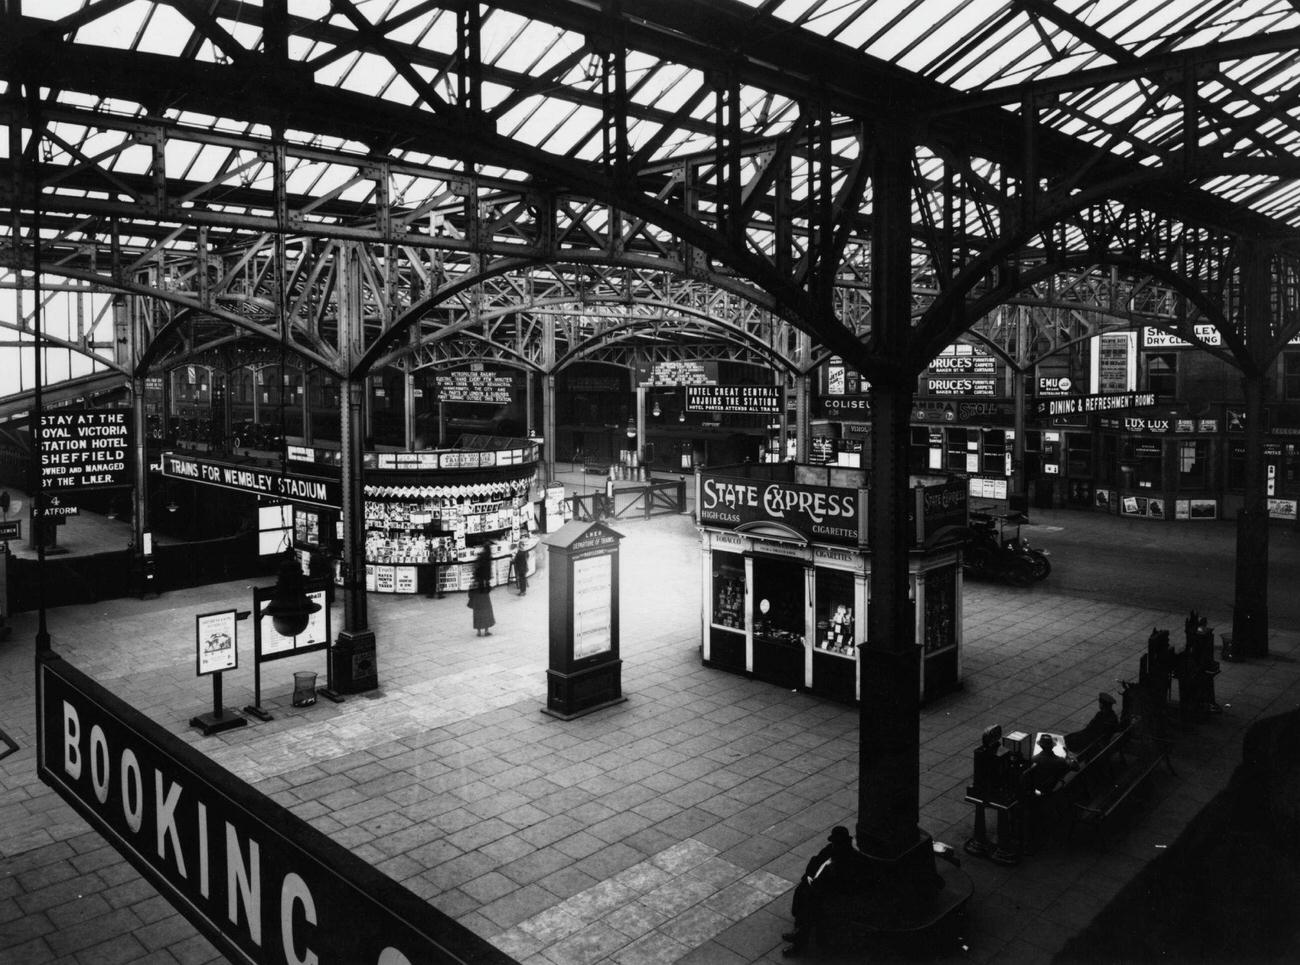 A general view of the interior of Marylebone Station, London, 1928